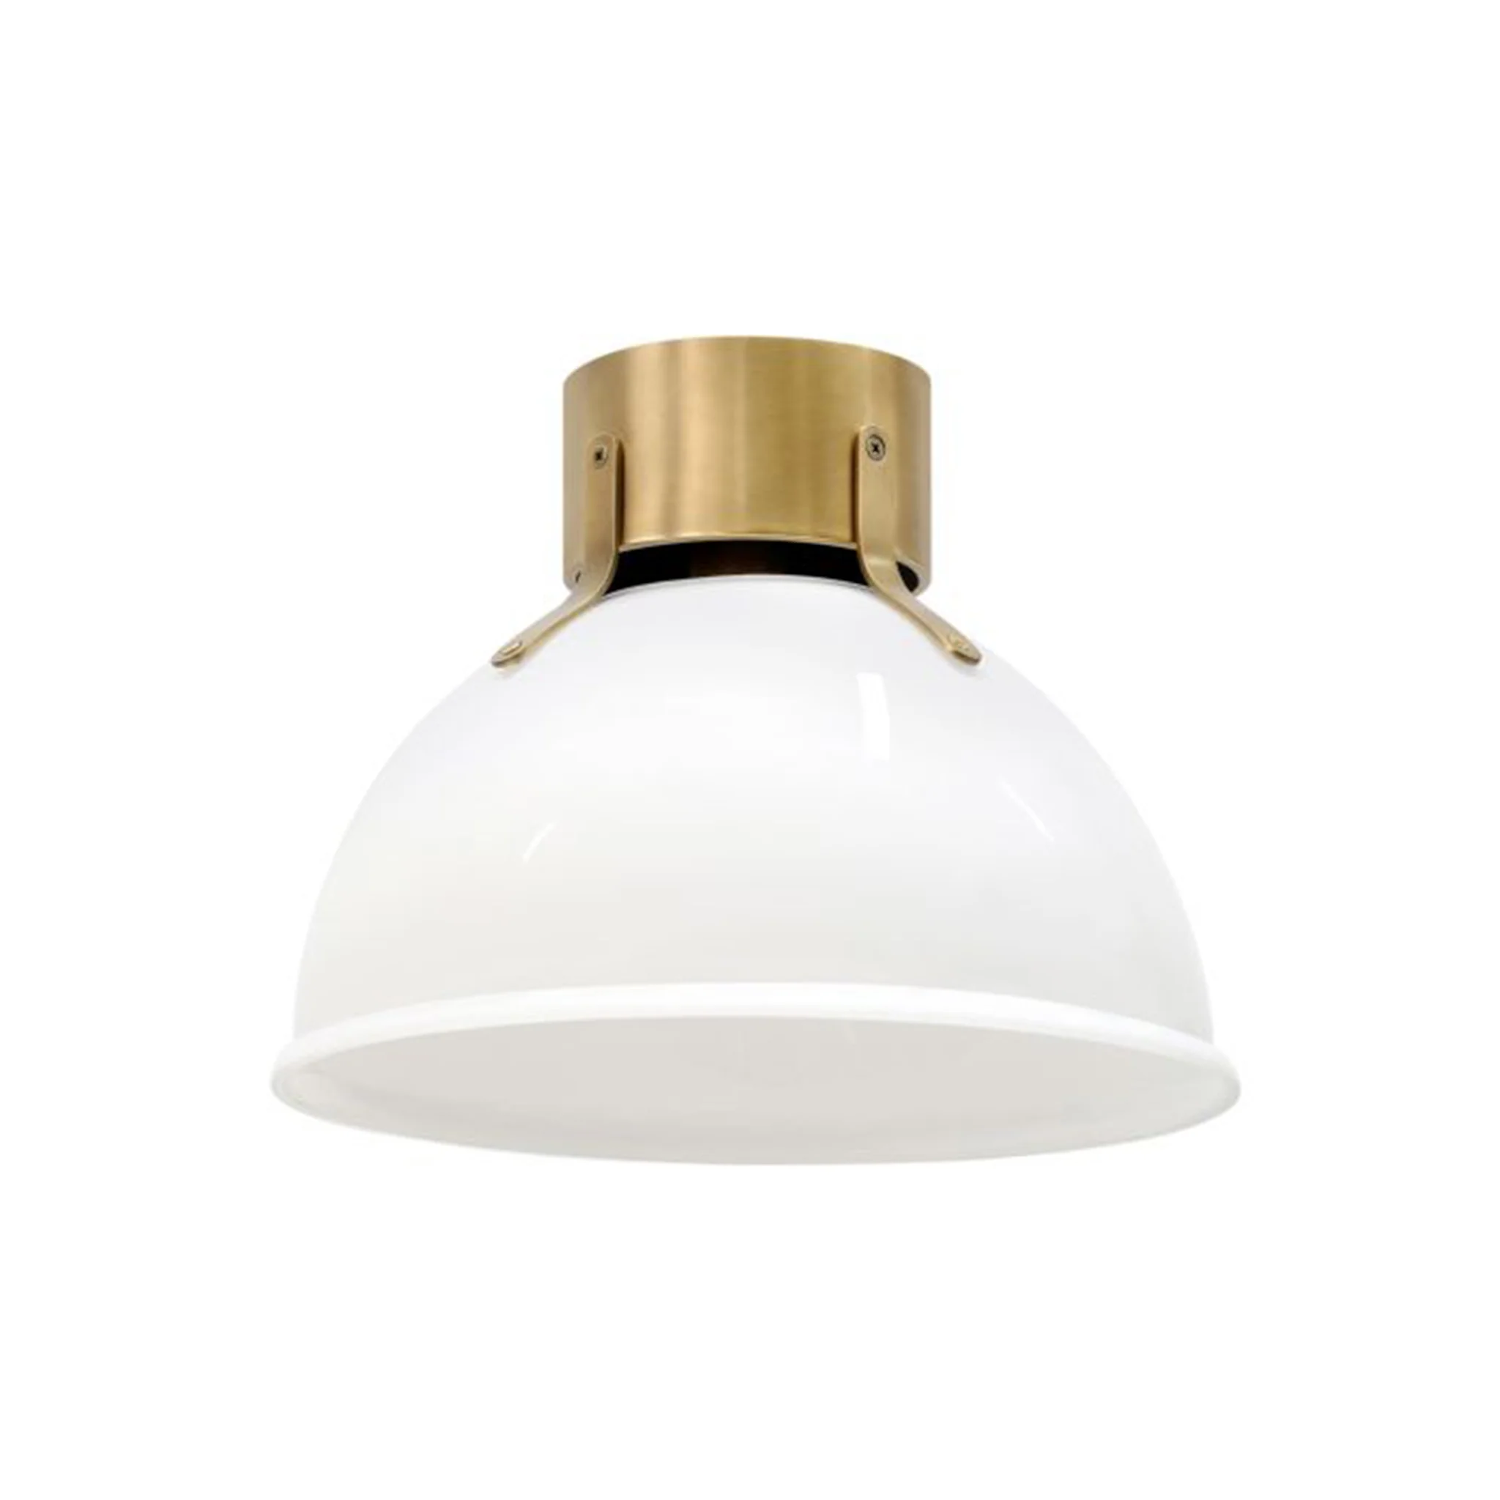 Product image of Argo Ceiling Light Opal Glass